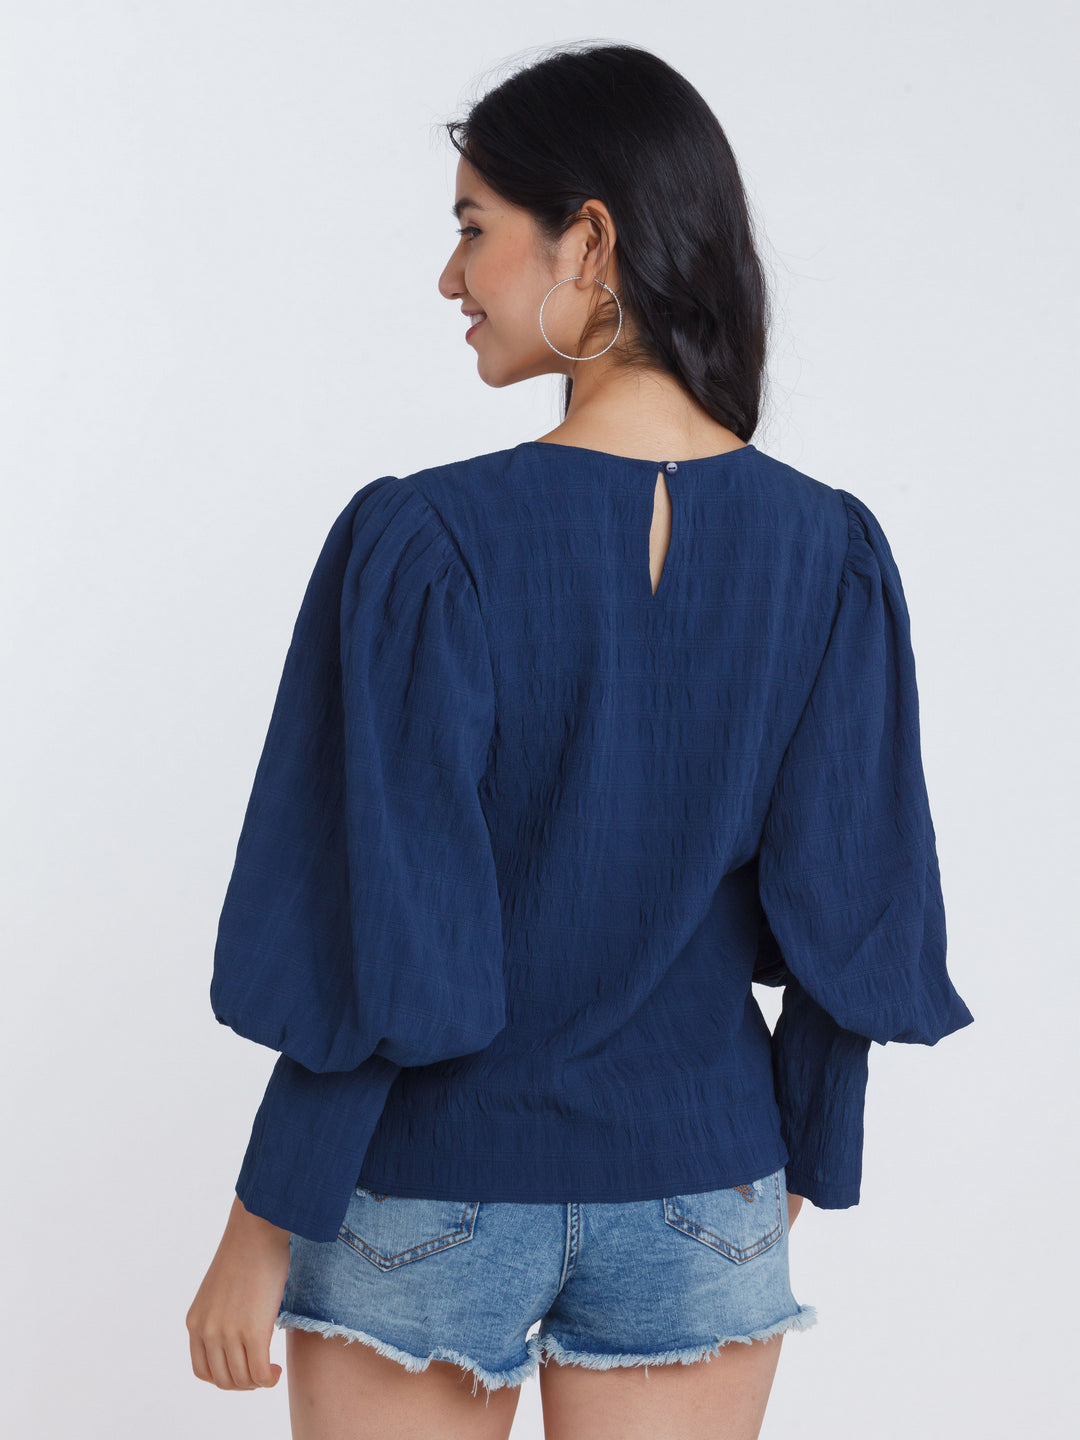 Navy Blue Puff Sleeve Top For Women